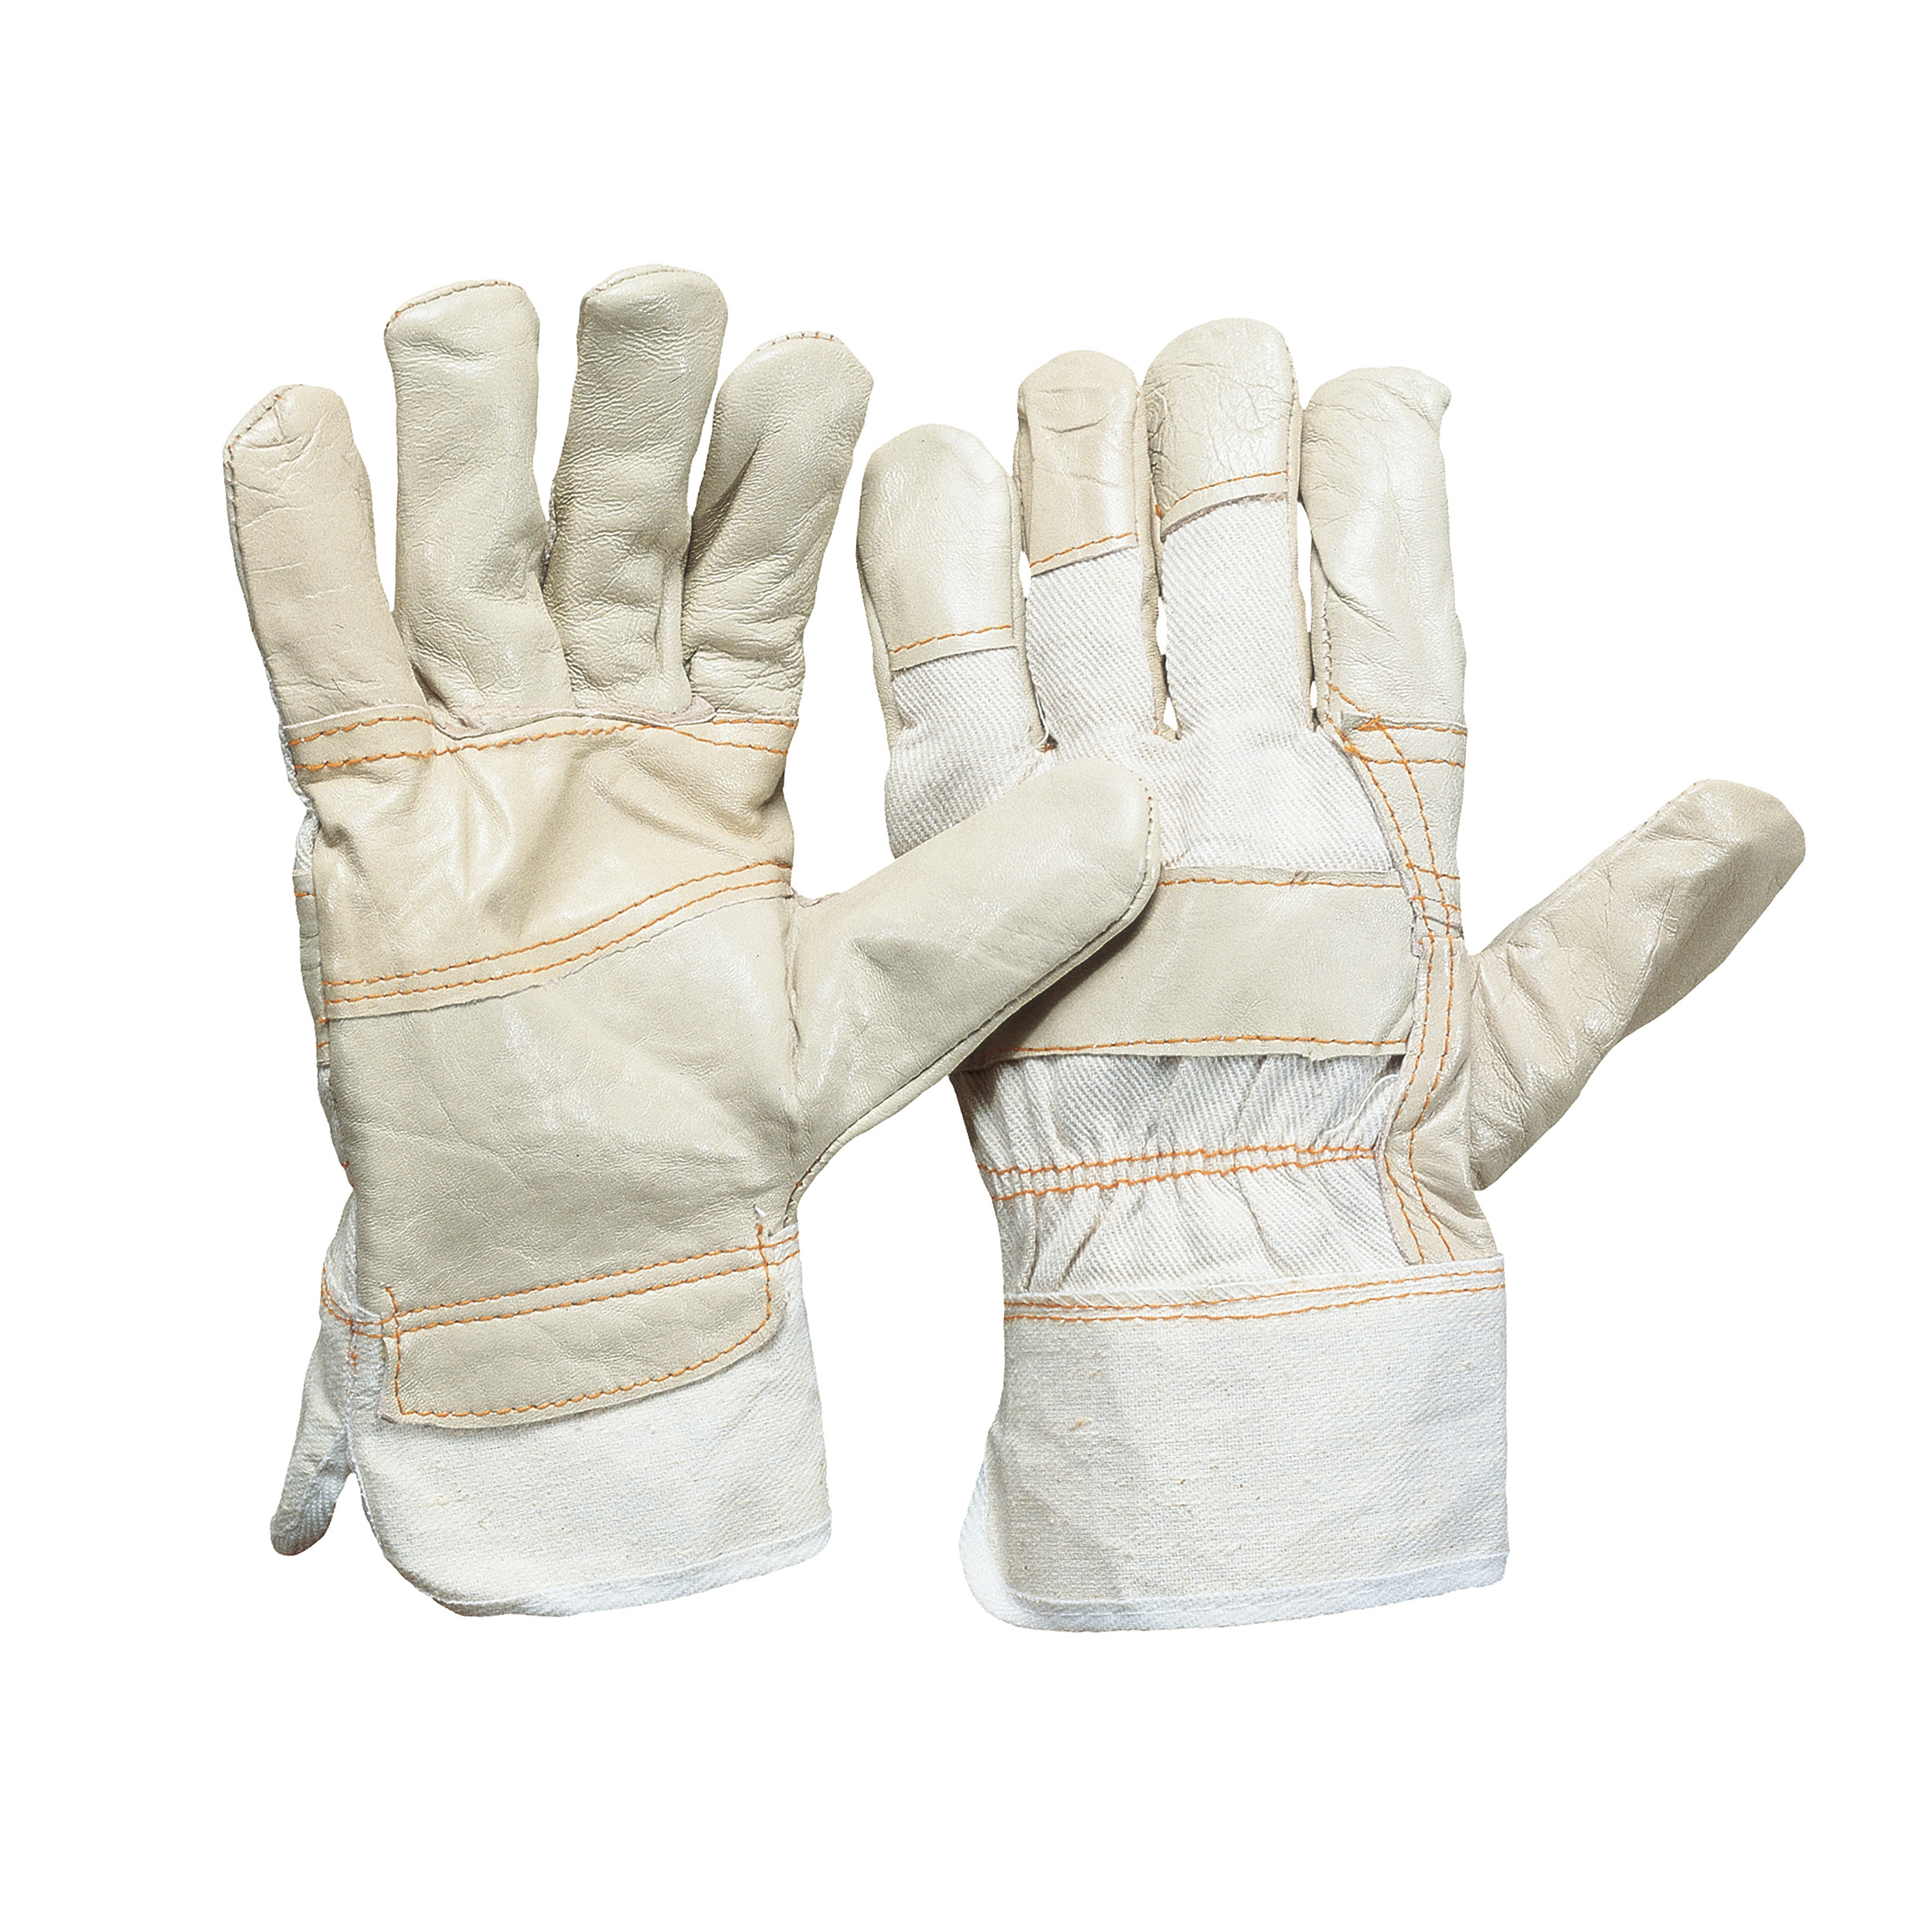 glove, 5 fingers format, leather, light-coloured, lined, white drilling, boosted